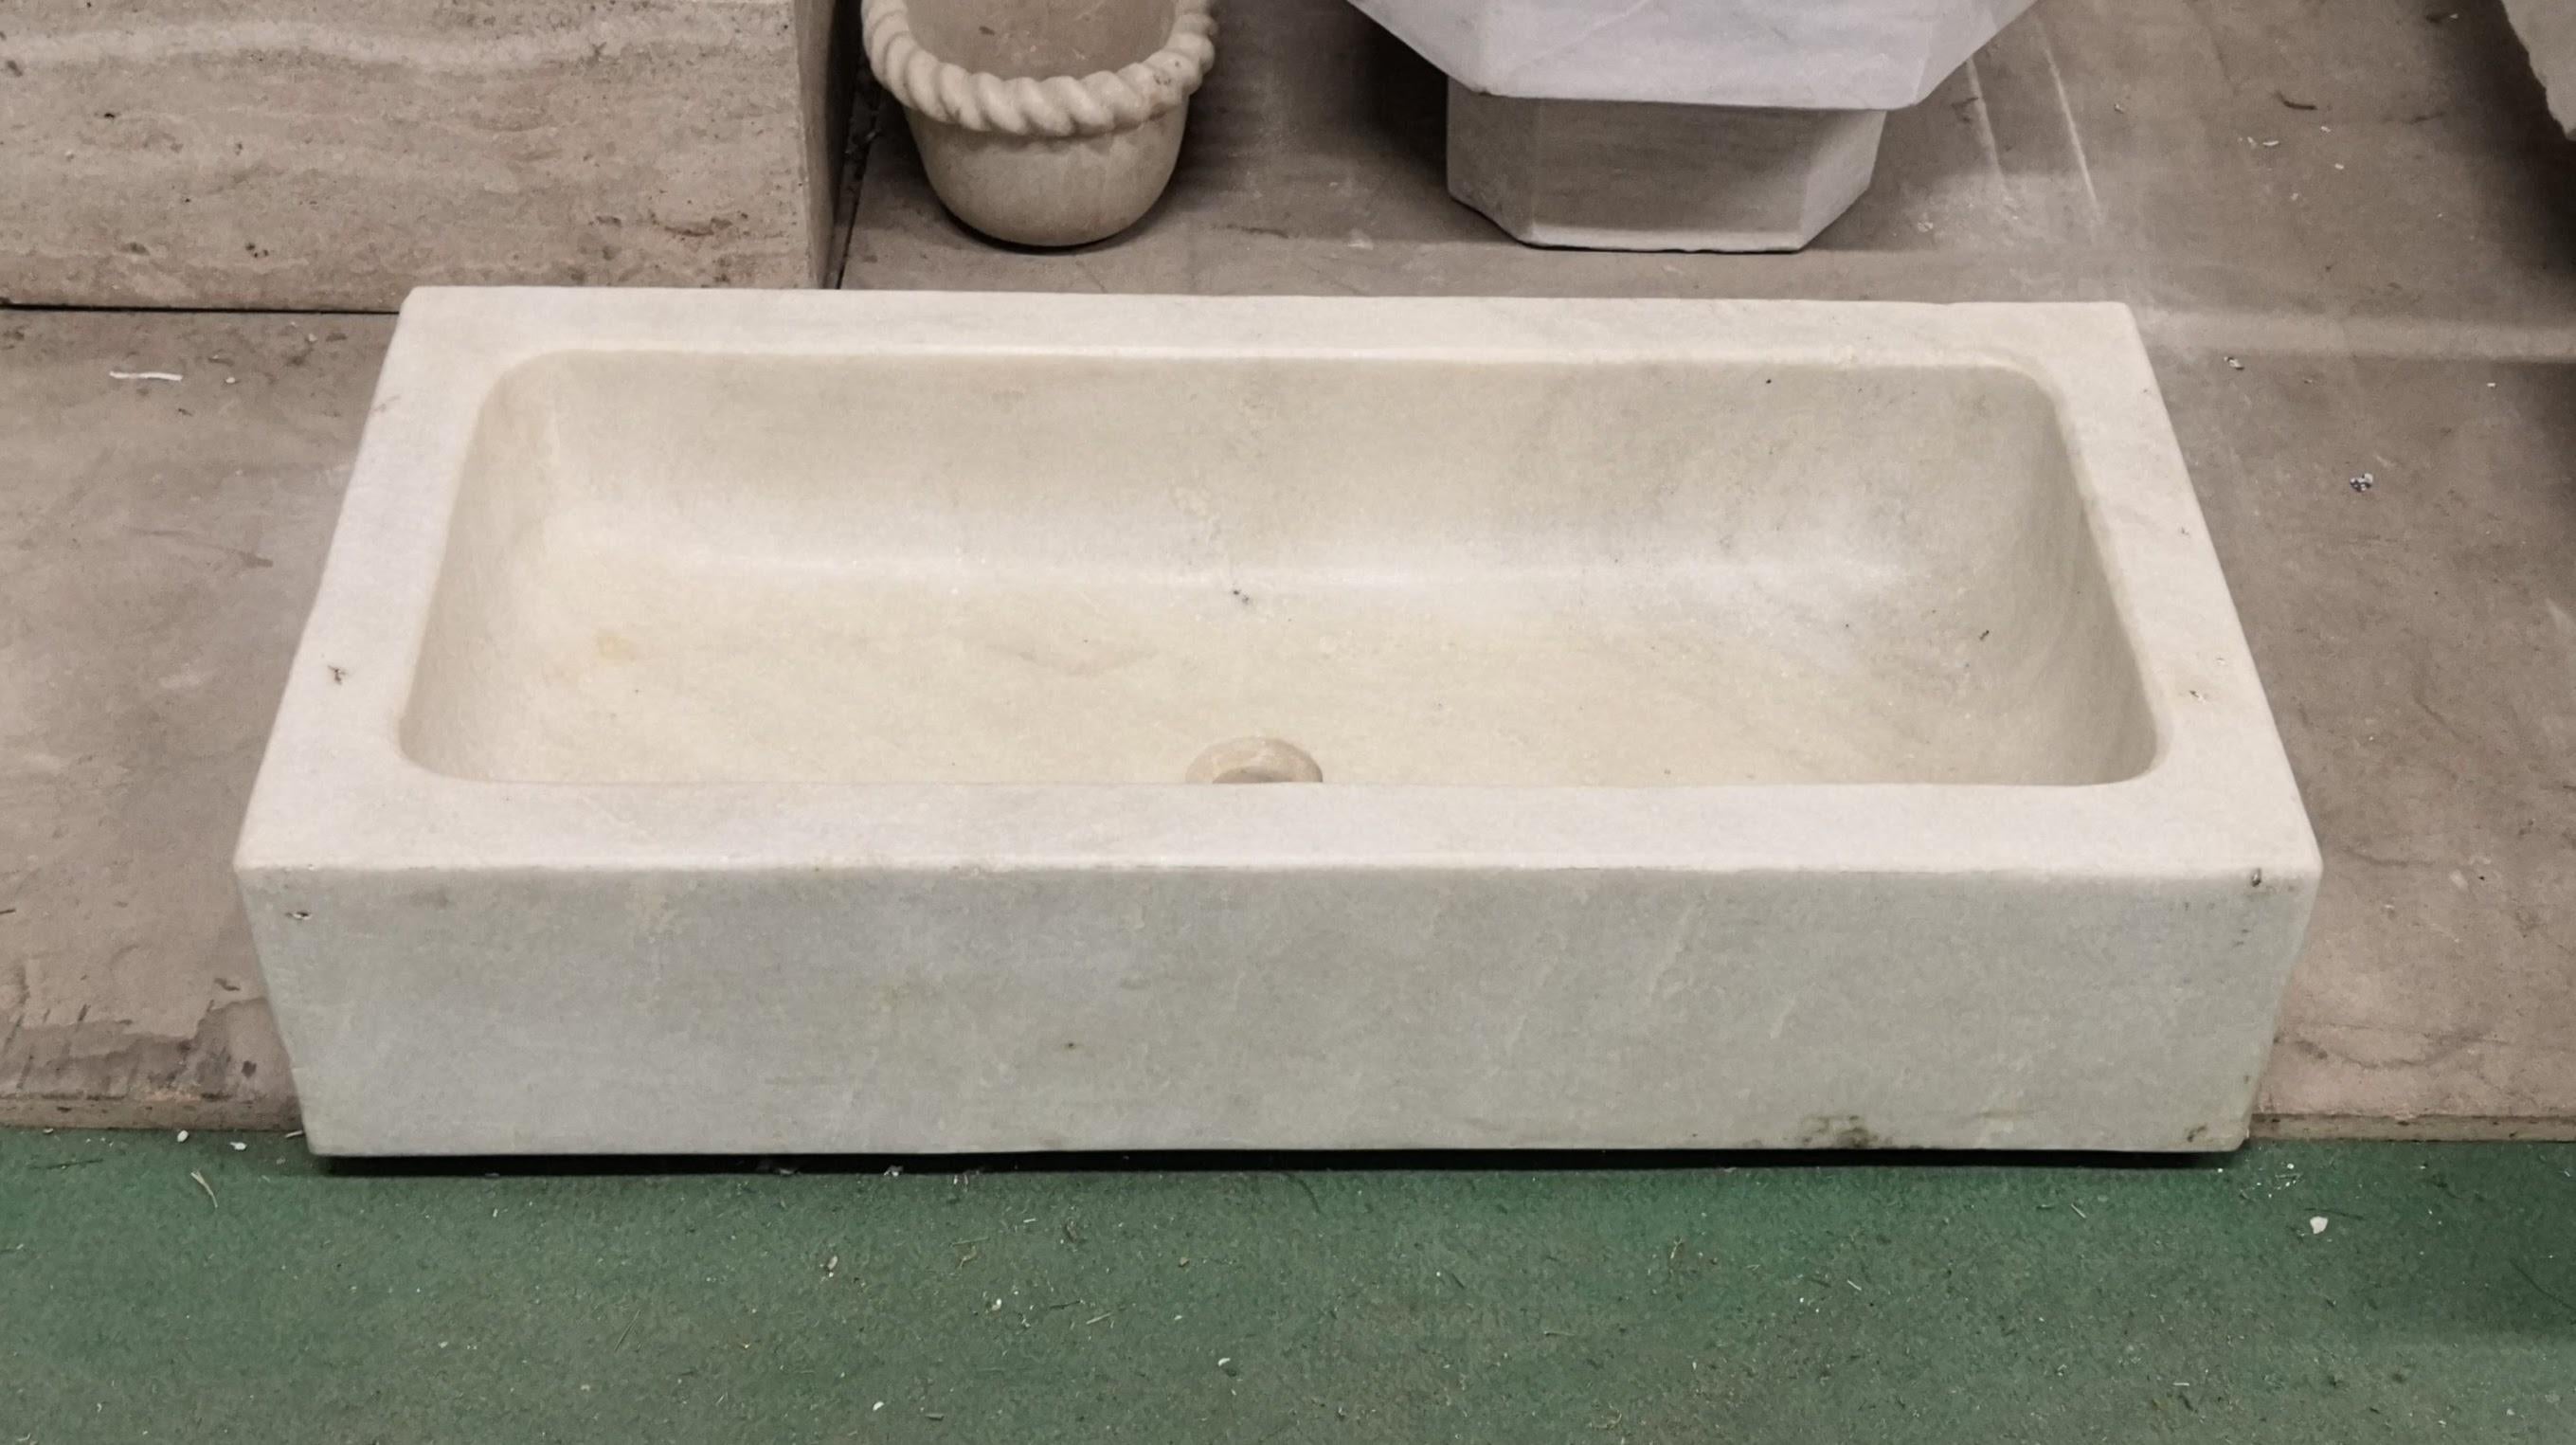 A simple natural design ideal for kitchen or bathroom for old and new buildings,
superb warm veined character, cut from one piece of carrara marble.

